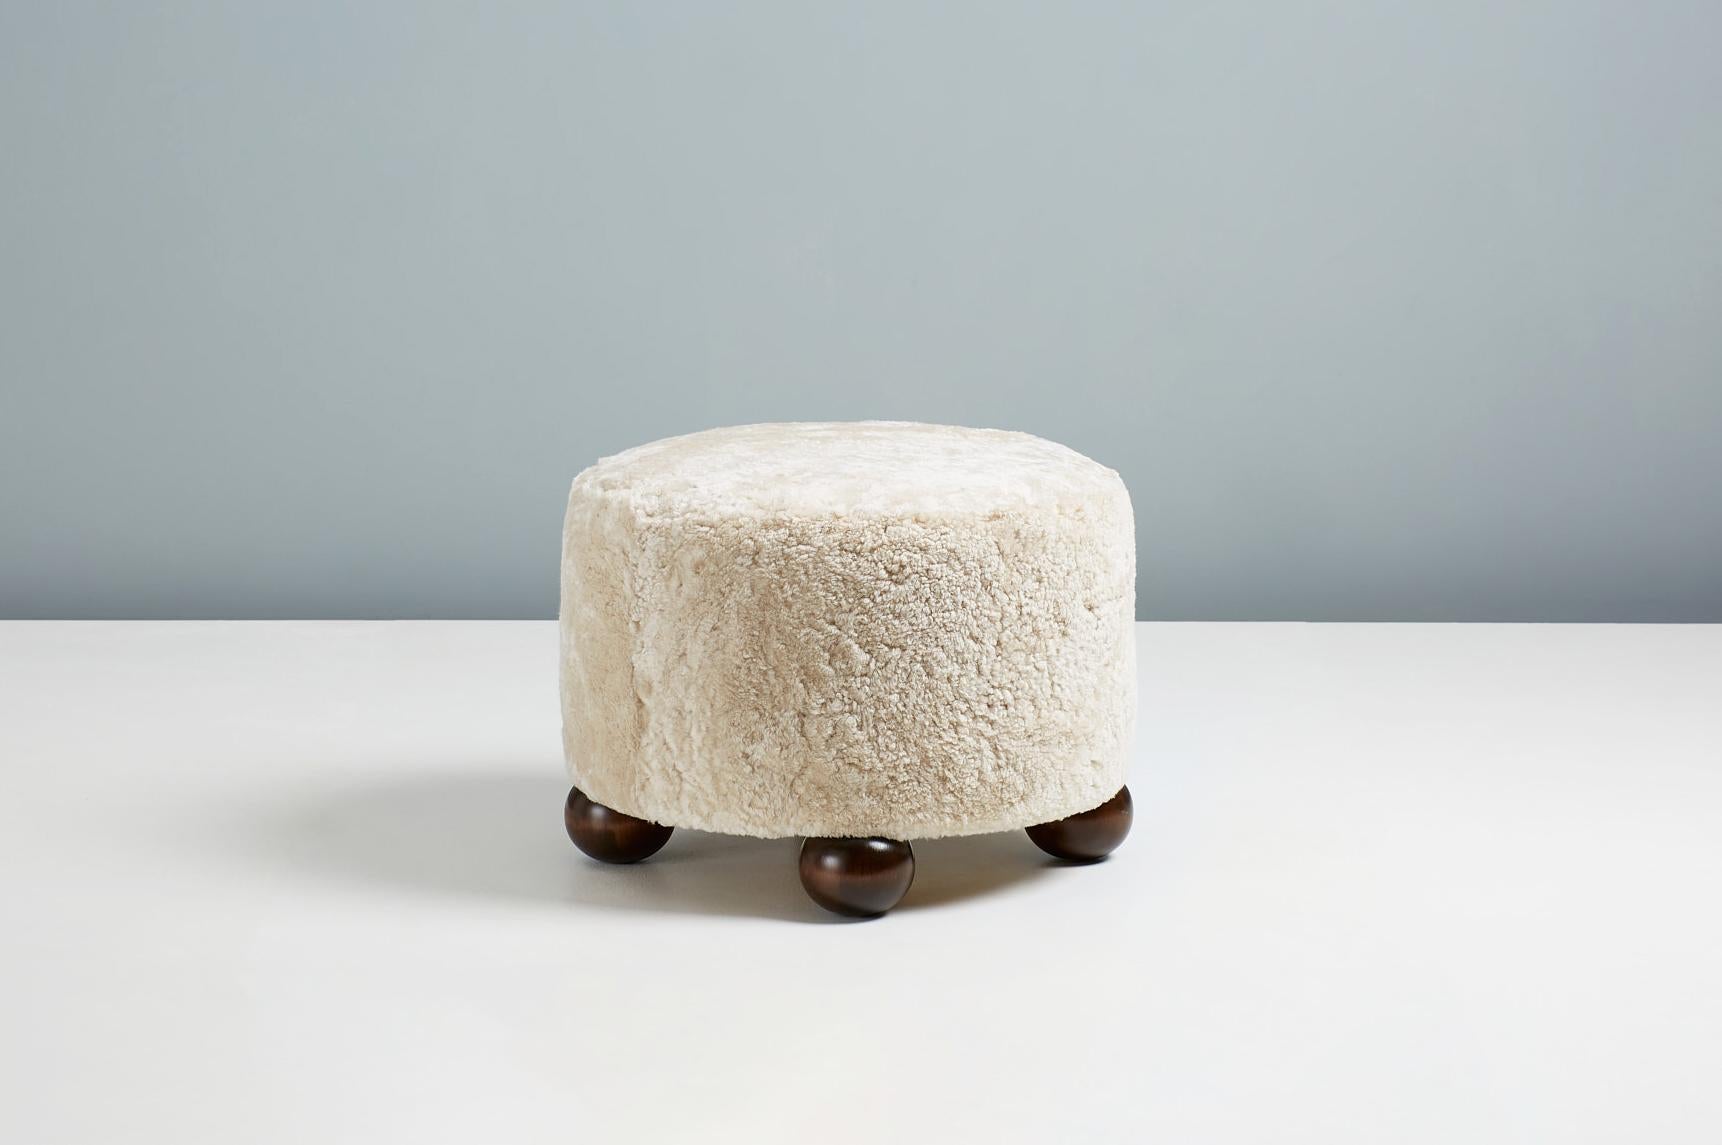 Dagmar design - round ottoman.

Custom-made ottomans developed & produced at our workshops in London using the highest quality materials. These examples are upholstered in Moonlight sheepskin with stained and polished tulipwood ball feet. This